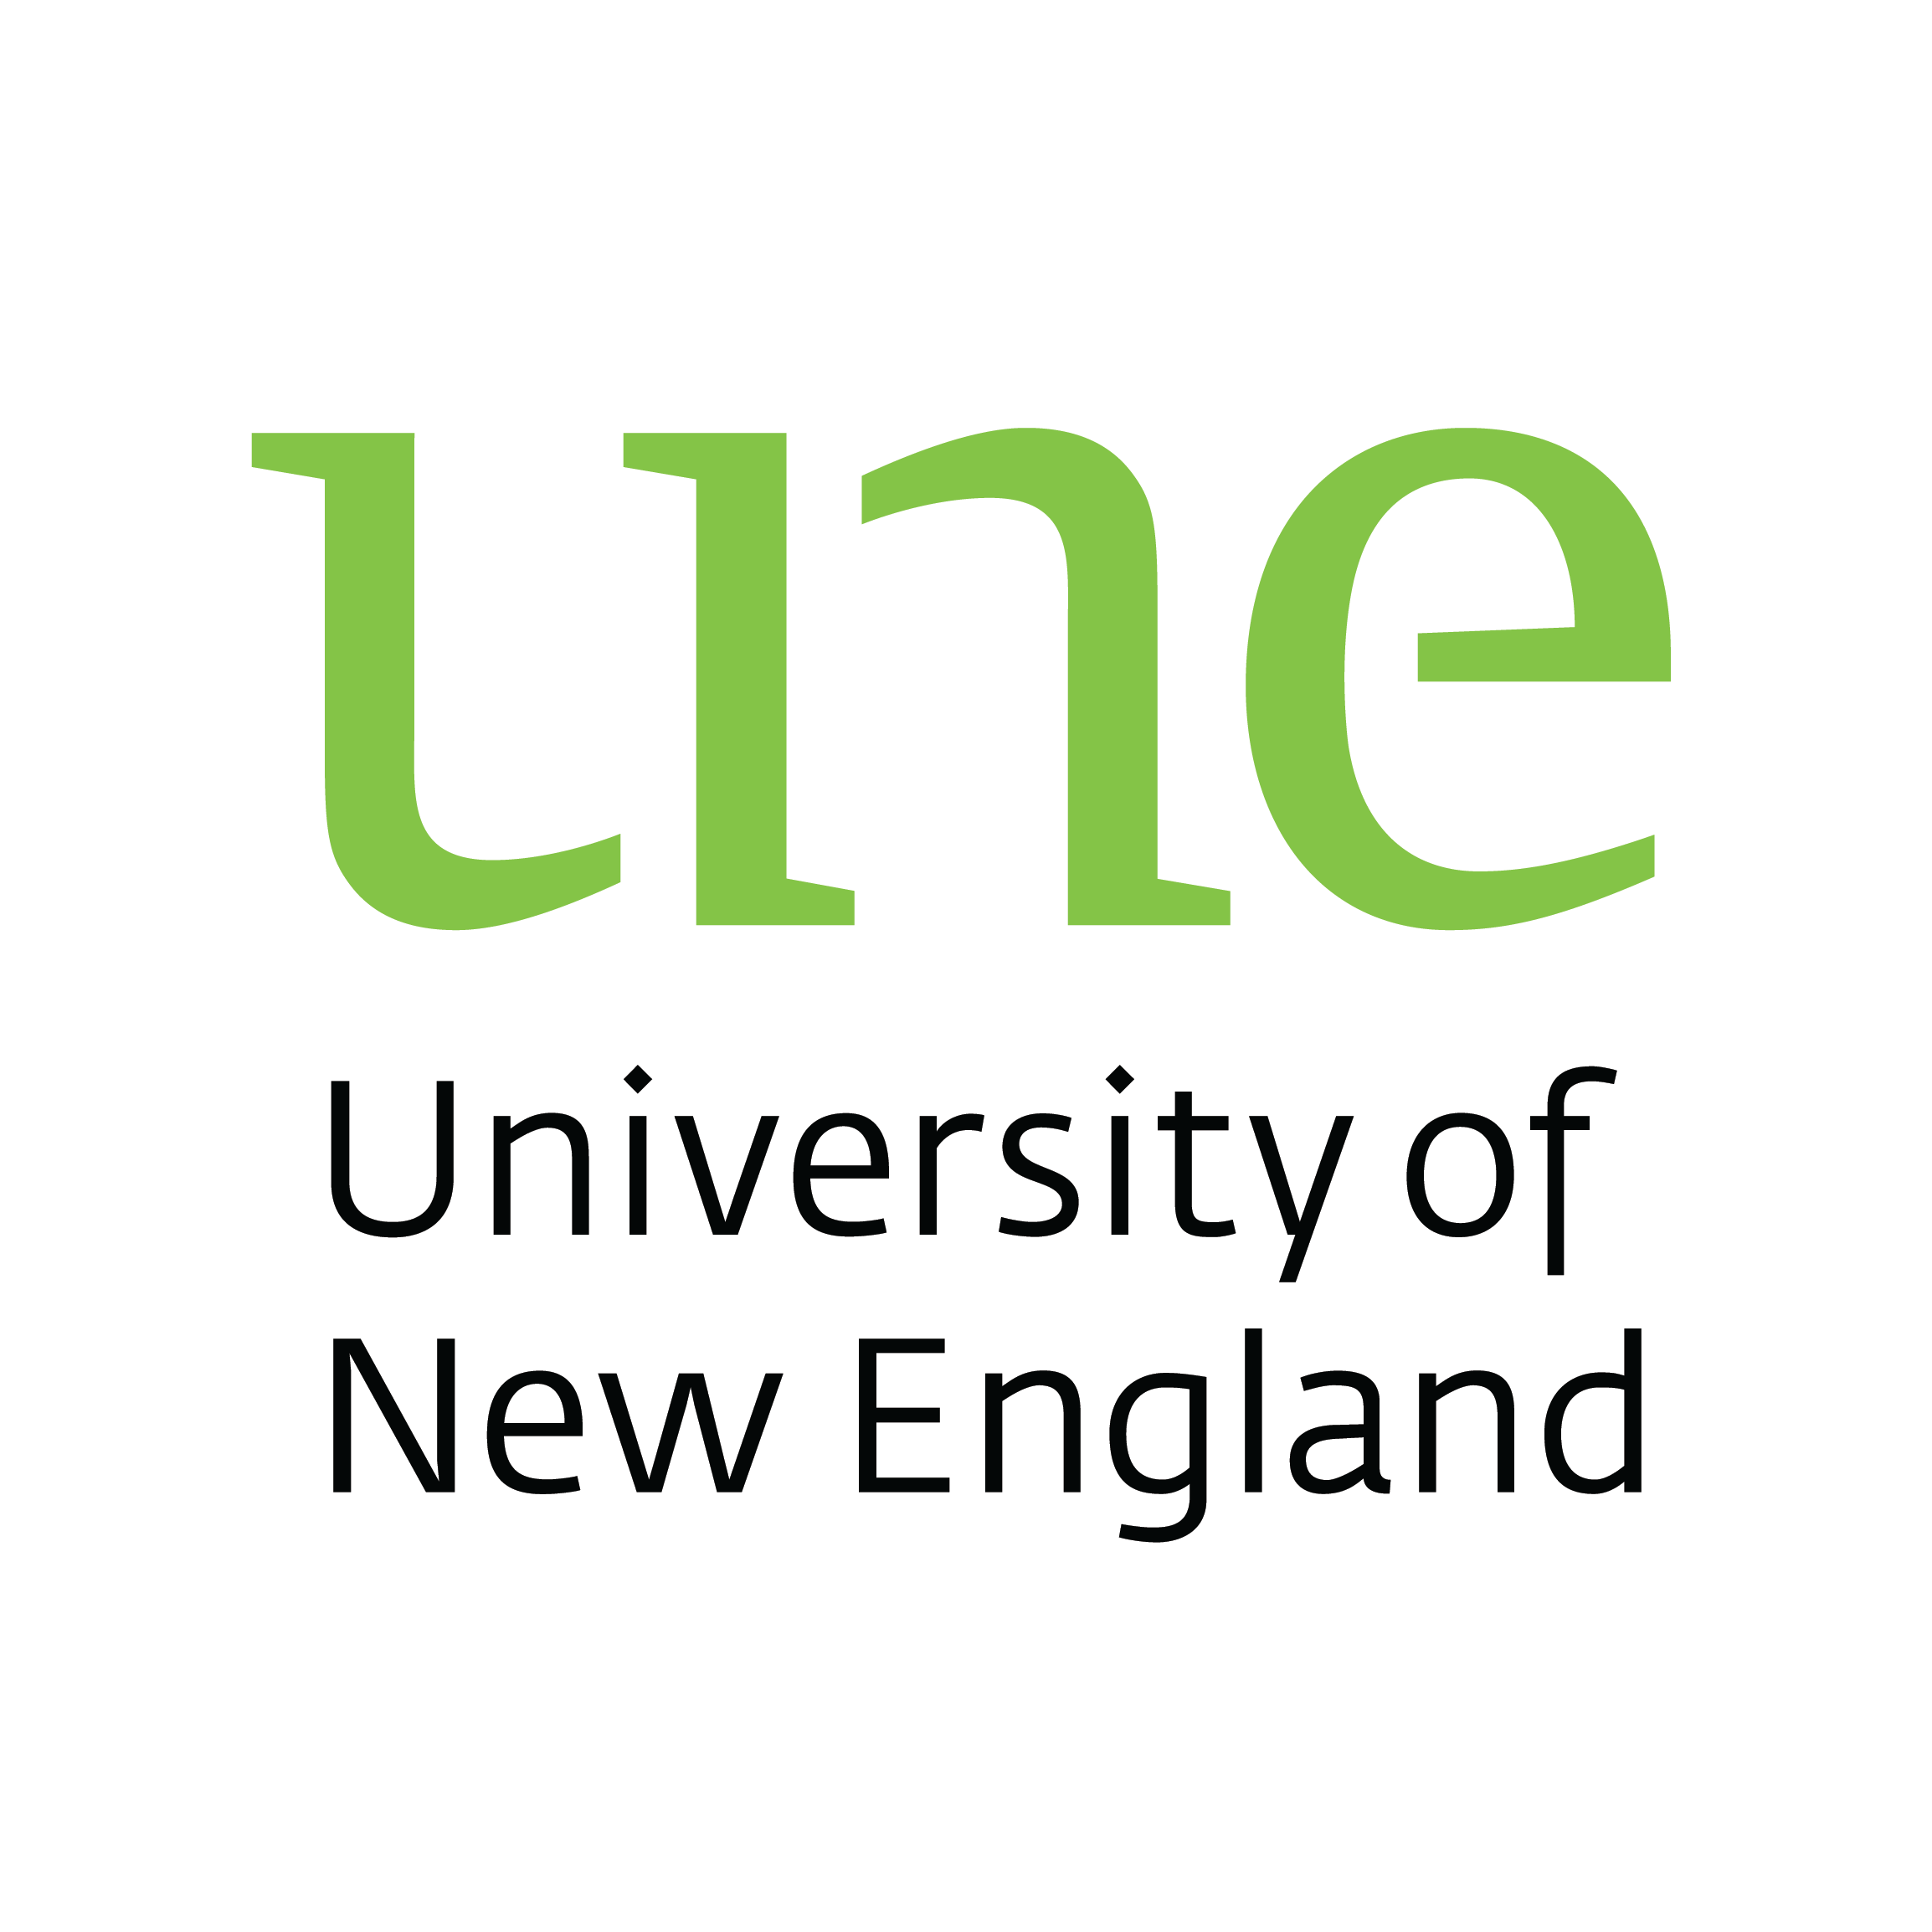 university-of-new-england_white_2x2.png